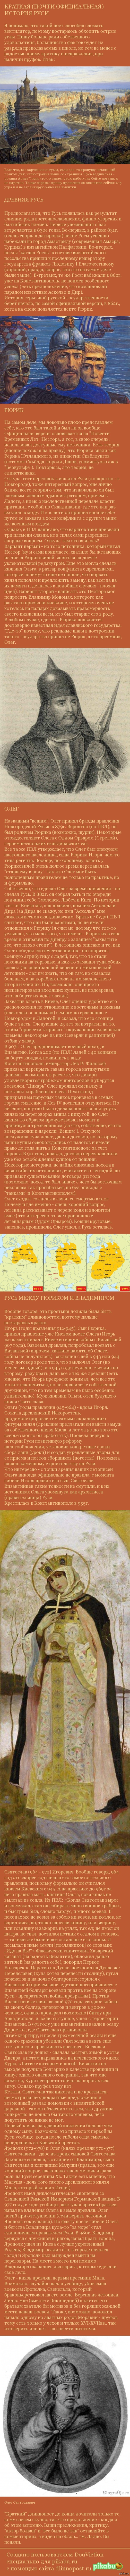 Brief (almost official) history of Russia from antiquity to ... - Story, Rus, Byzantium, princes, Longpost